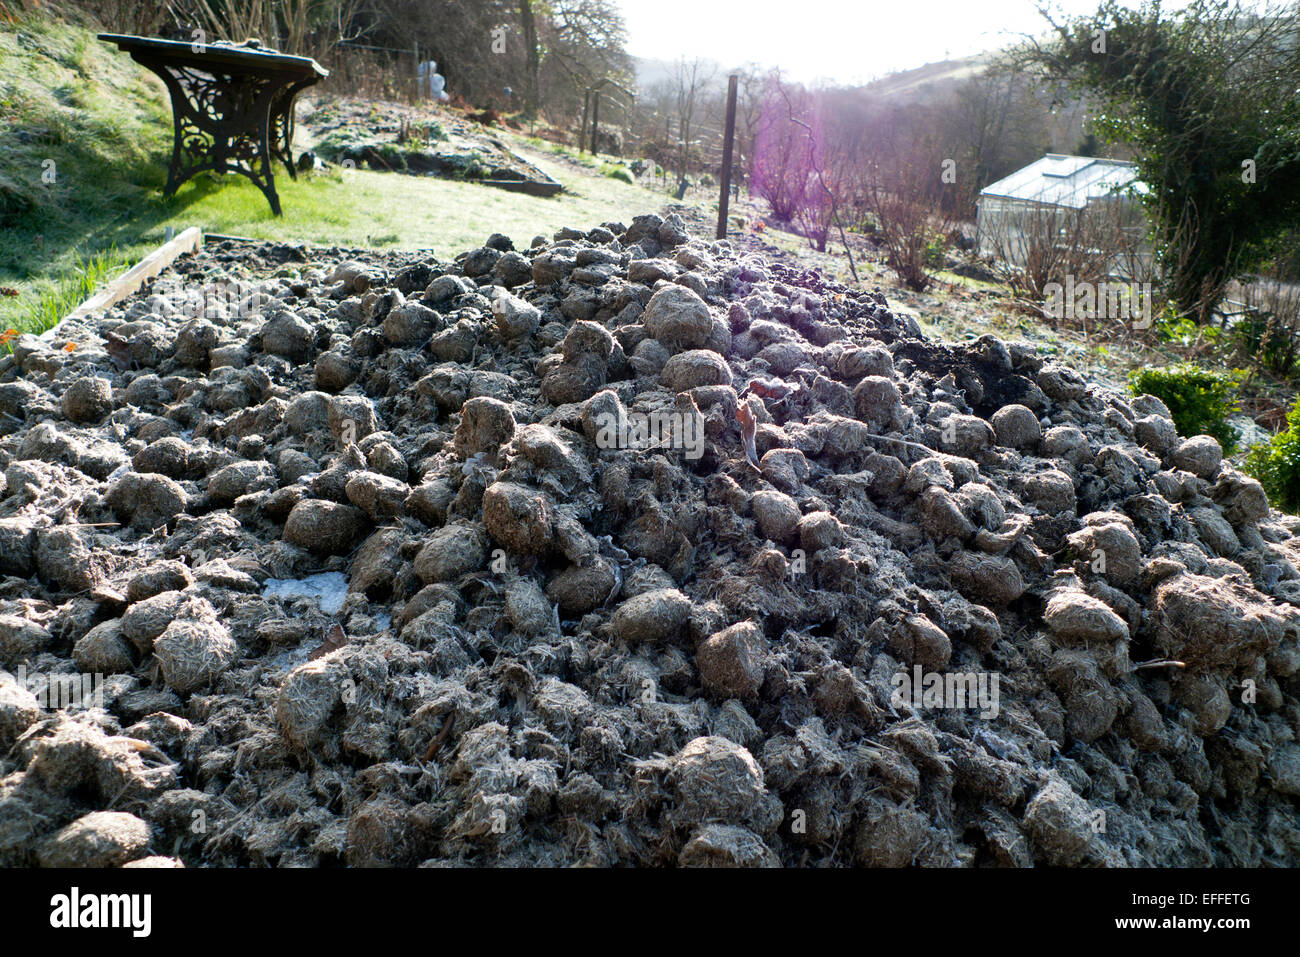 Pile of frozen horse manure in the vegetable garden on a sunny dry morning in rural Carmarthenshire, West Wales UK  KATHY DEWITT Stock Photo